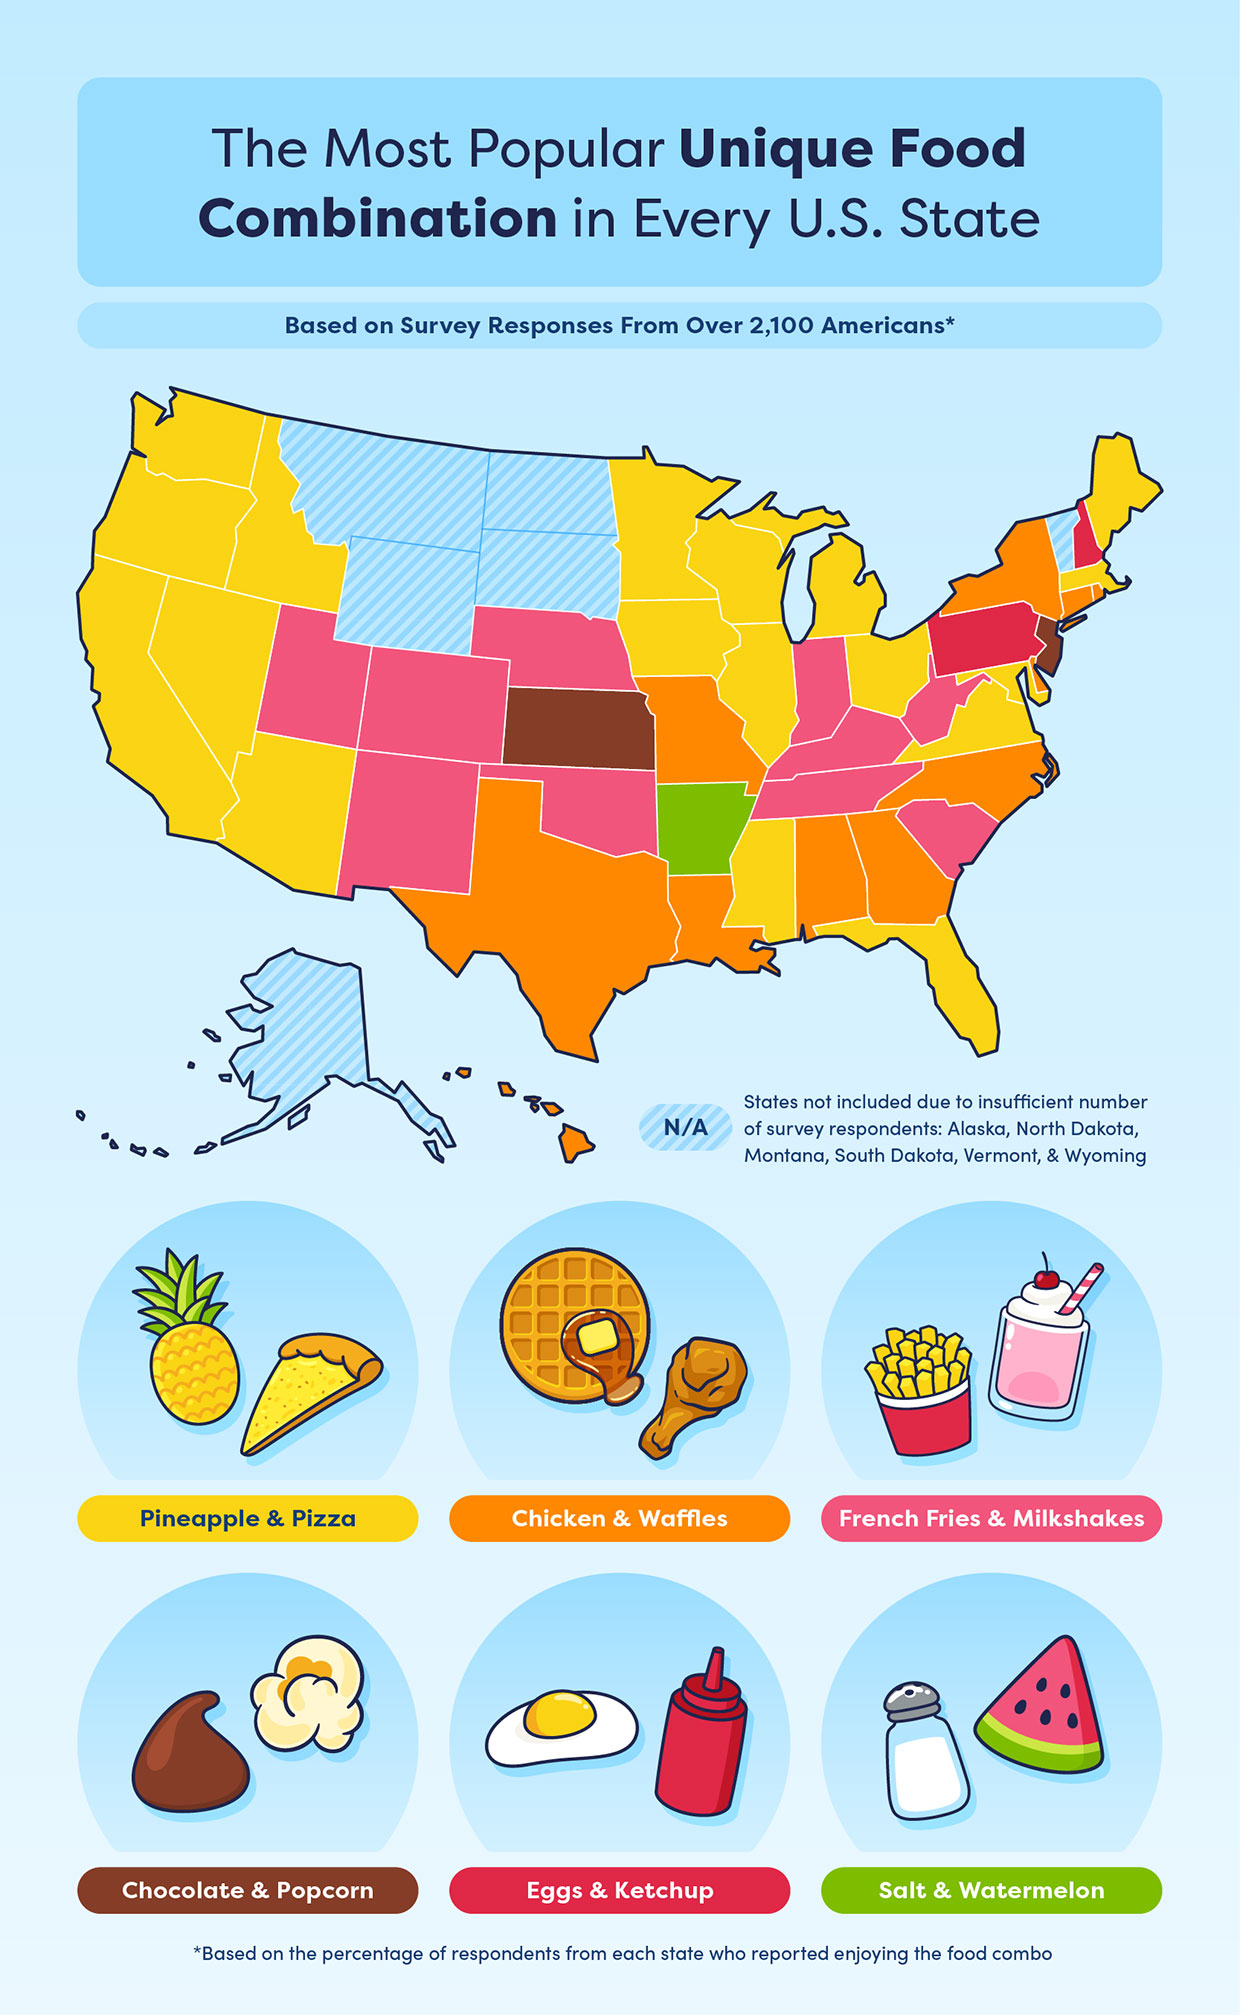 A U.S. map showing the most popular unique food combination in every state